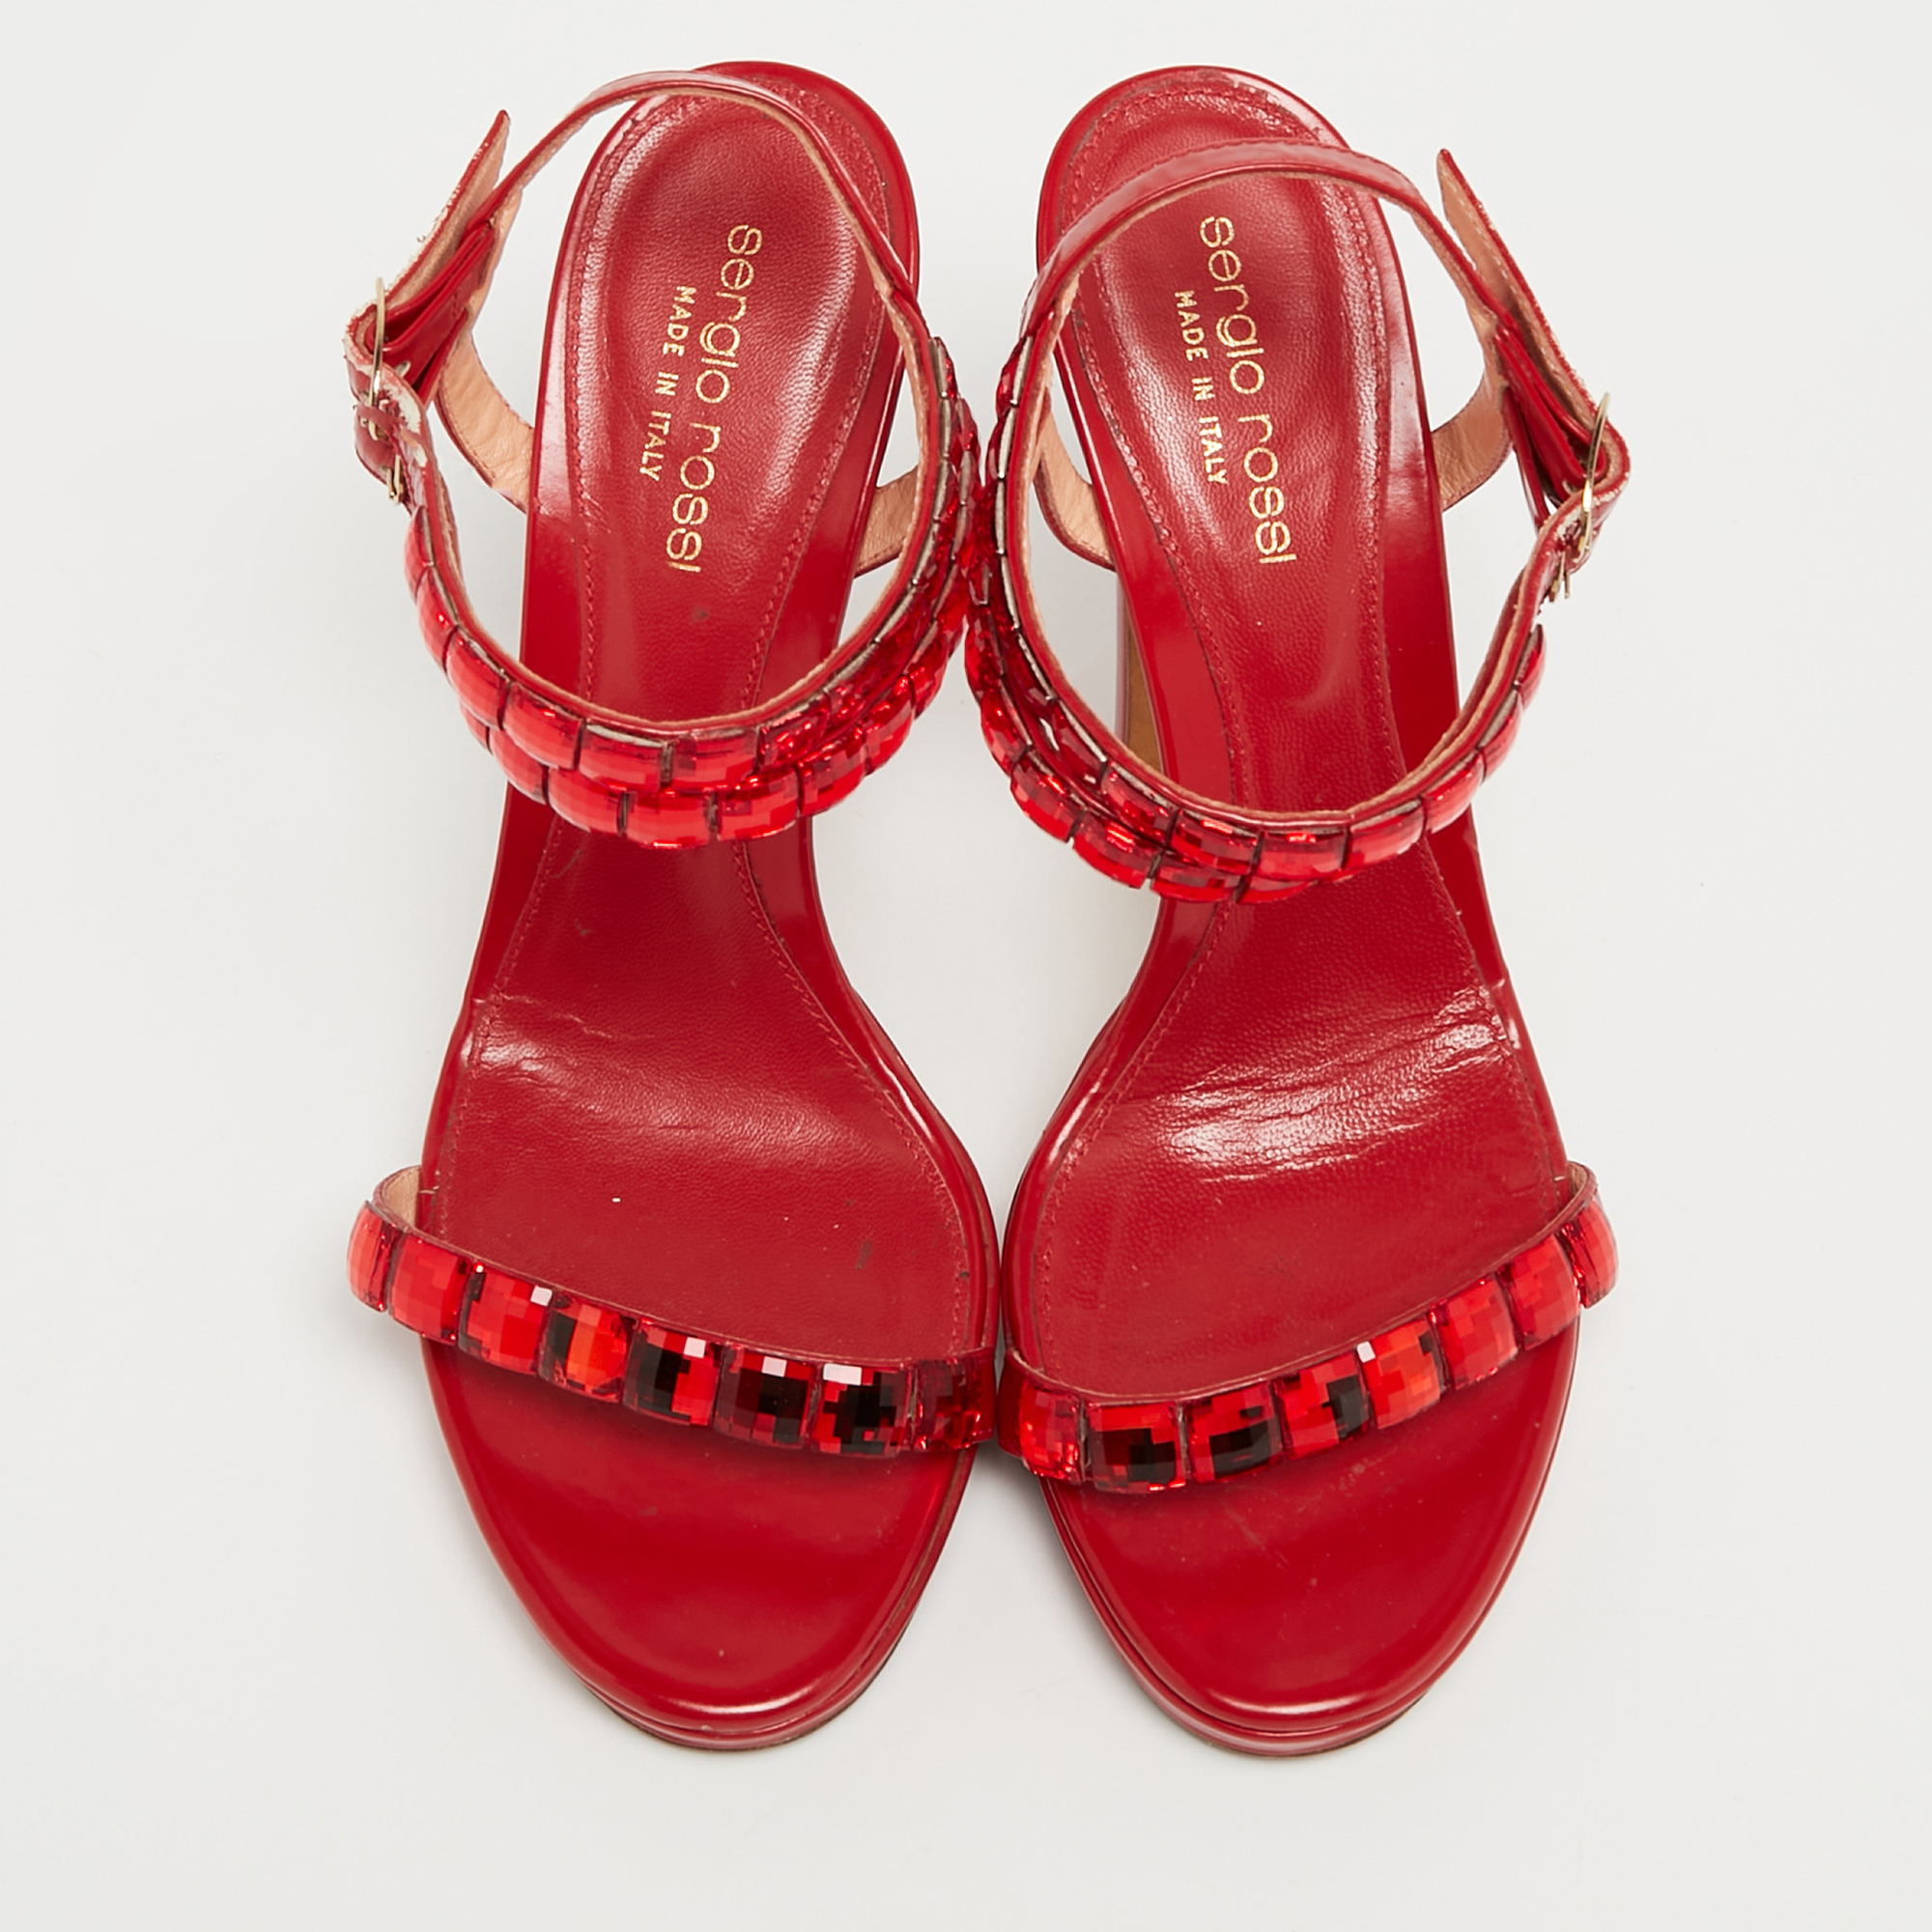 Sergio Rossi Red Leather Crystal Embellished Ankle Strap Sandals Size 37